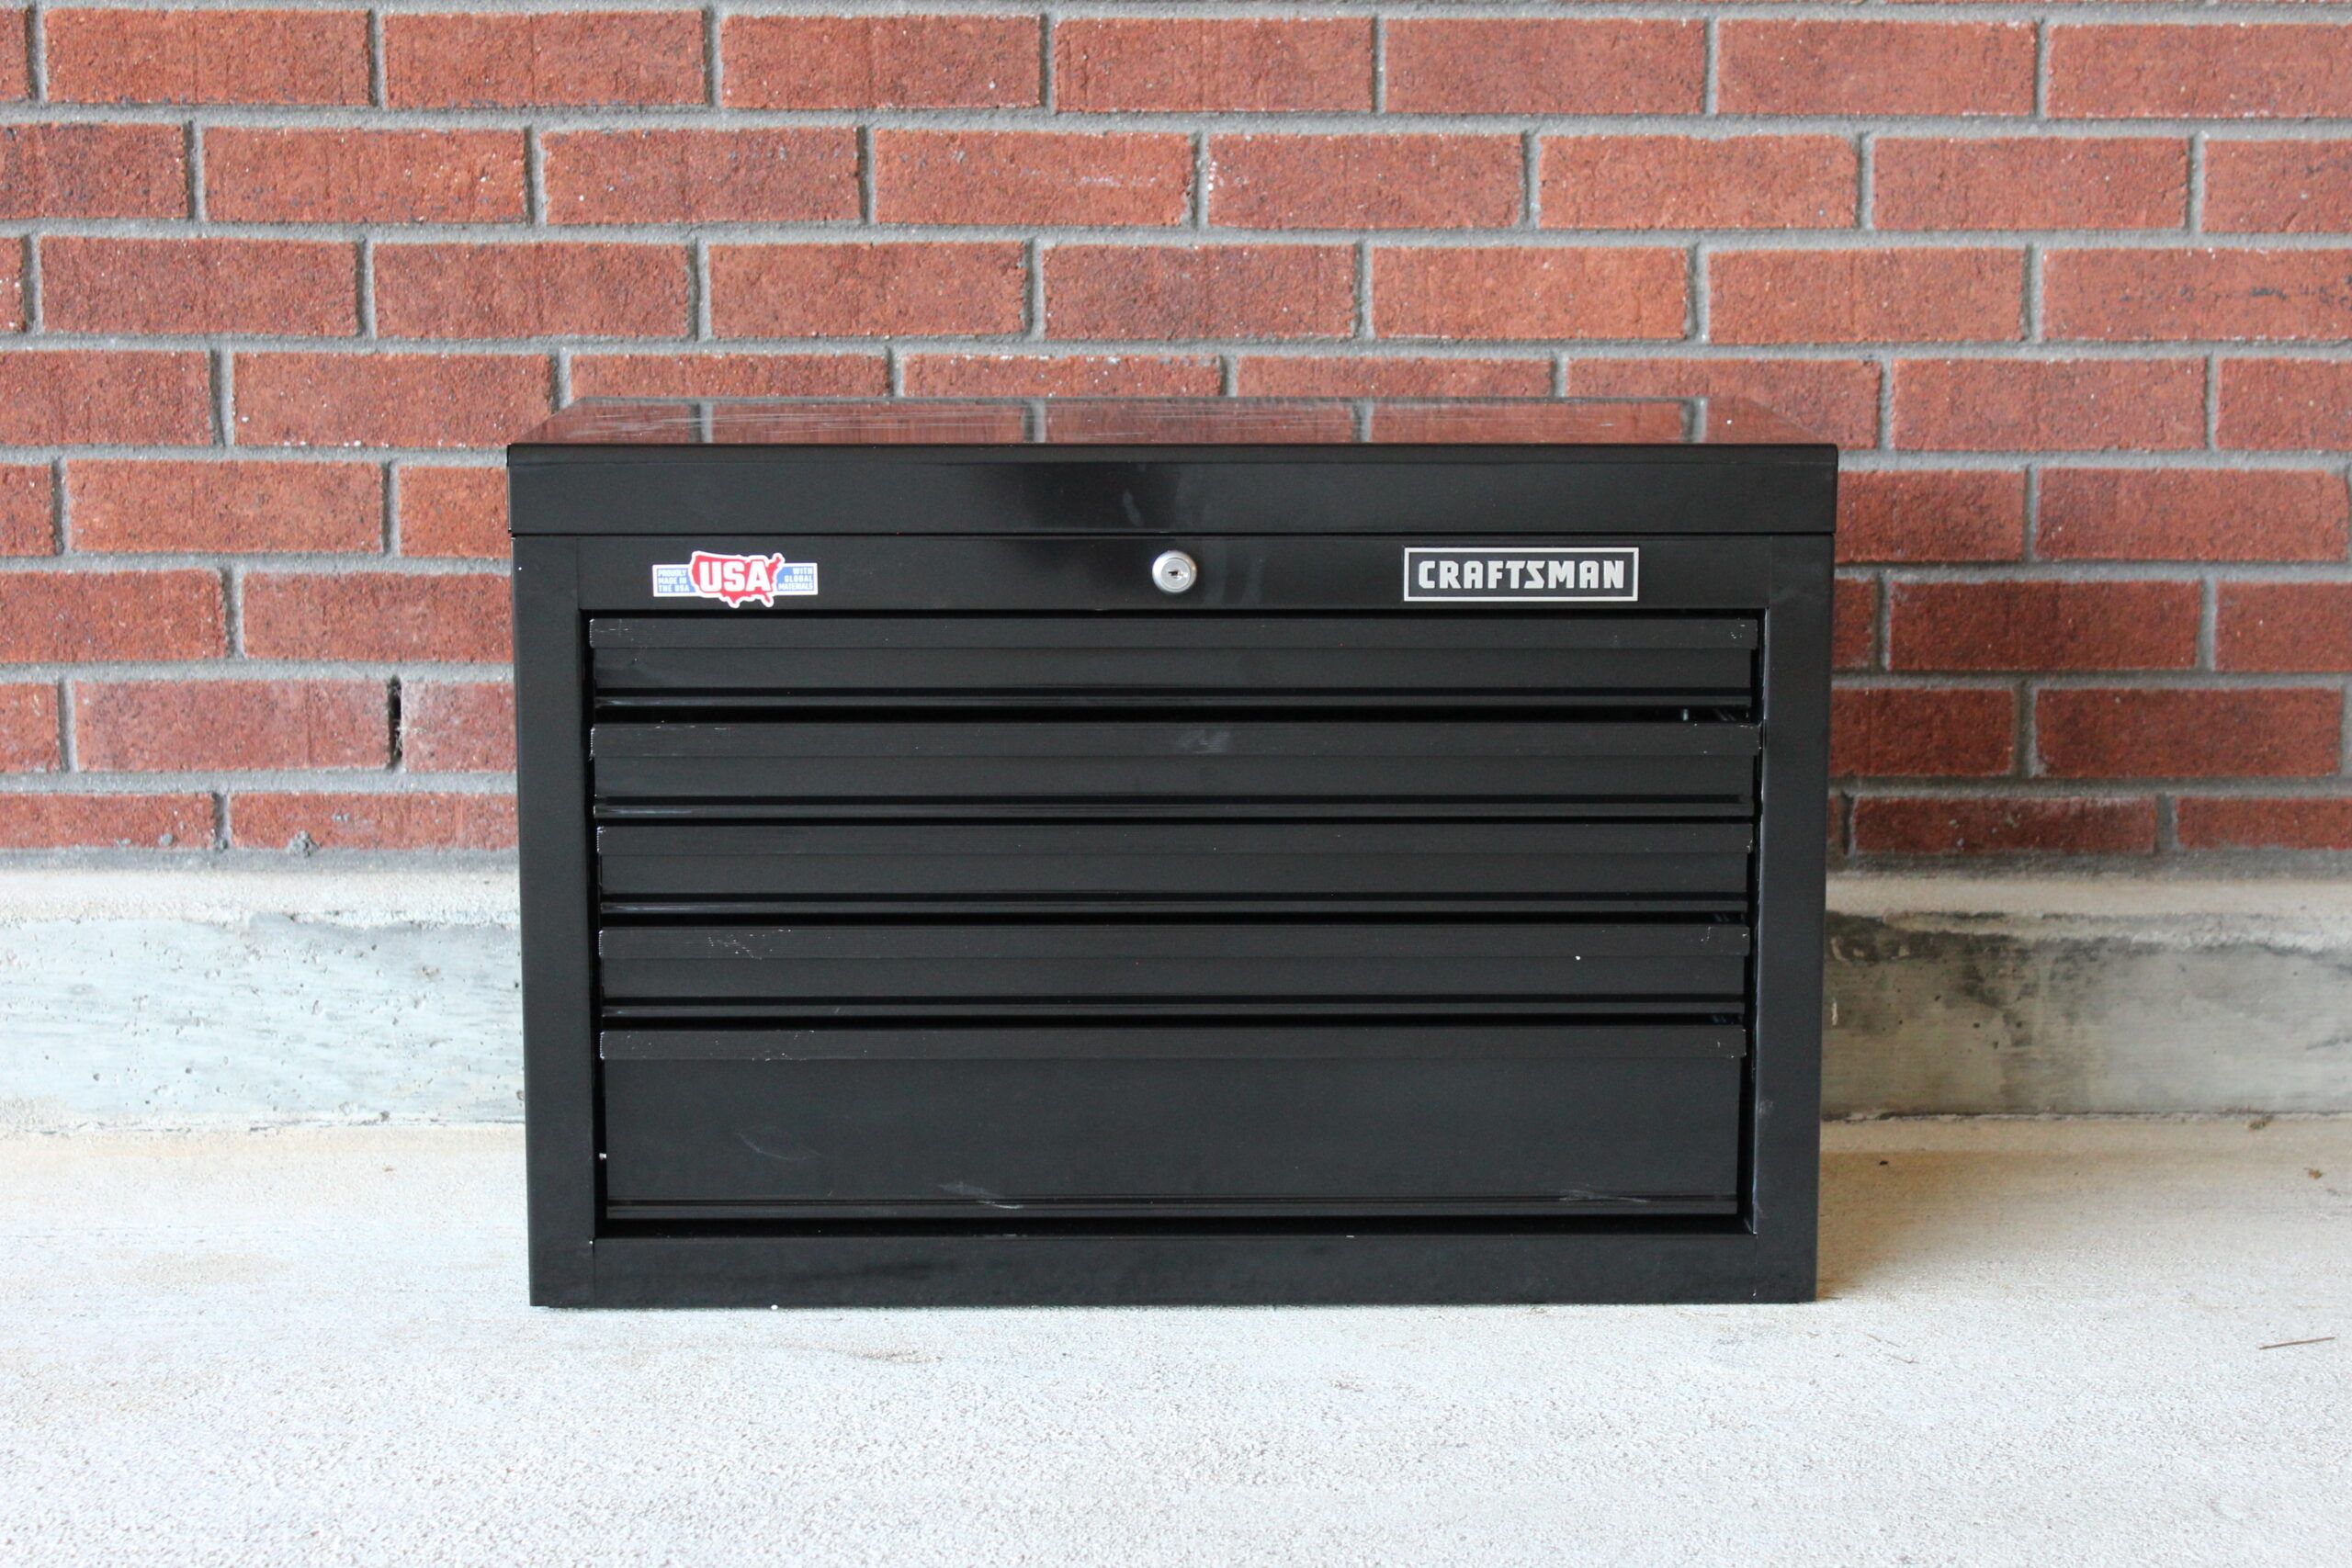 Here are Some Ways to Organize Your Toolbox Drawers